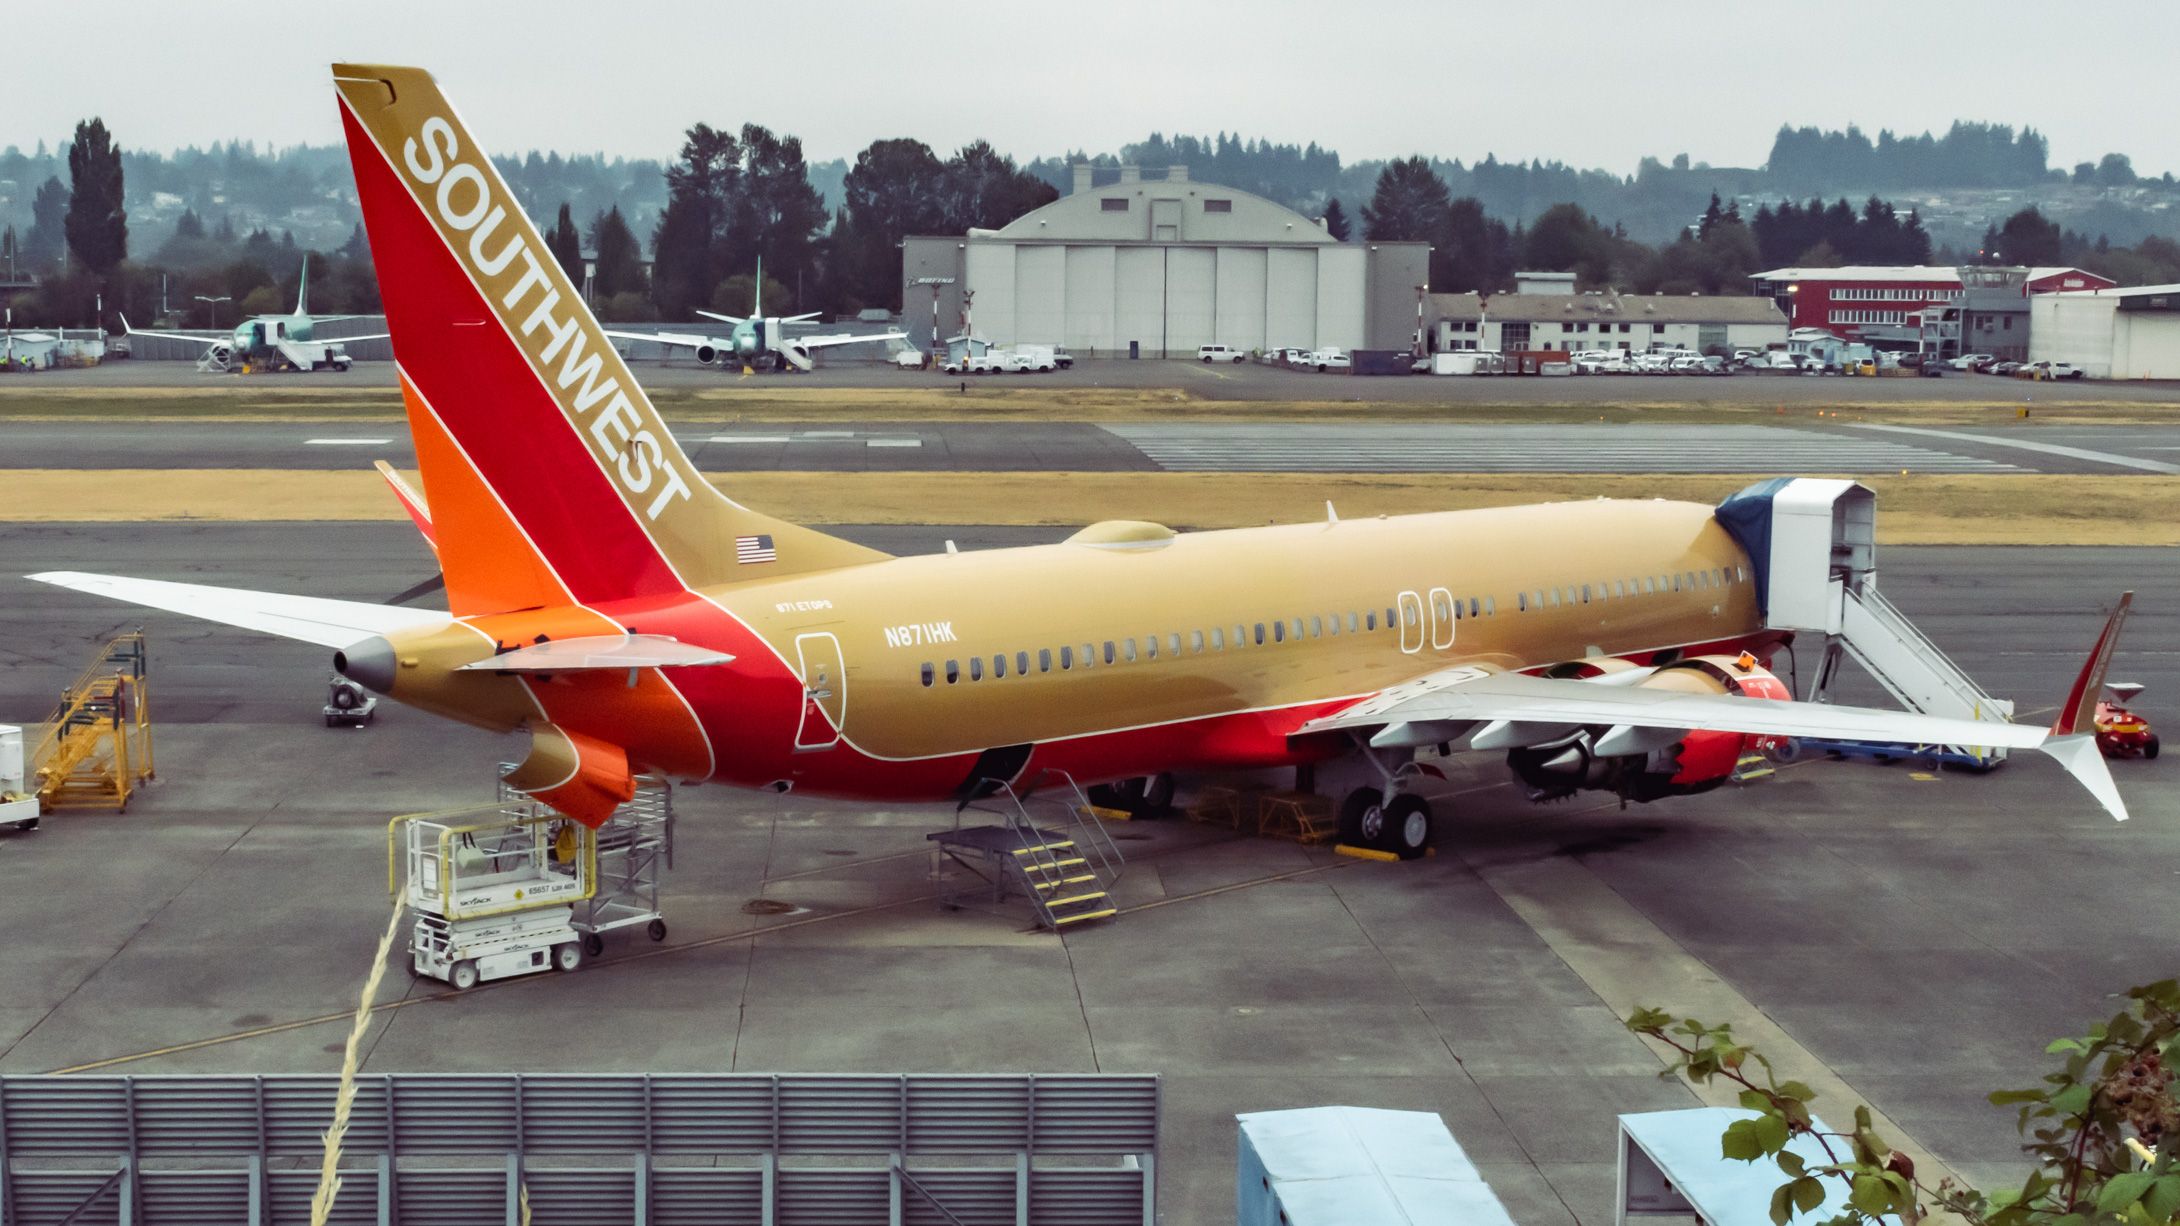 Southwest 737 8 MAX Herb Kelleher Tribute Livery at Renton Regional Airport